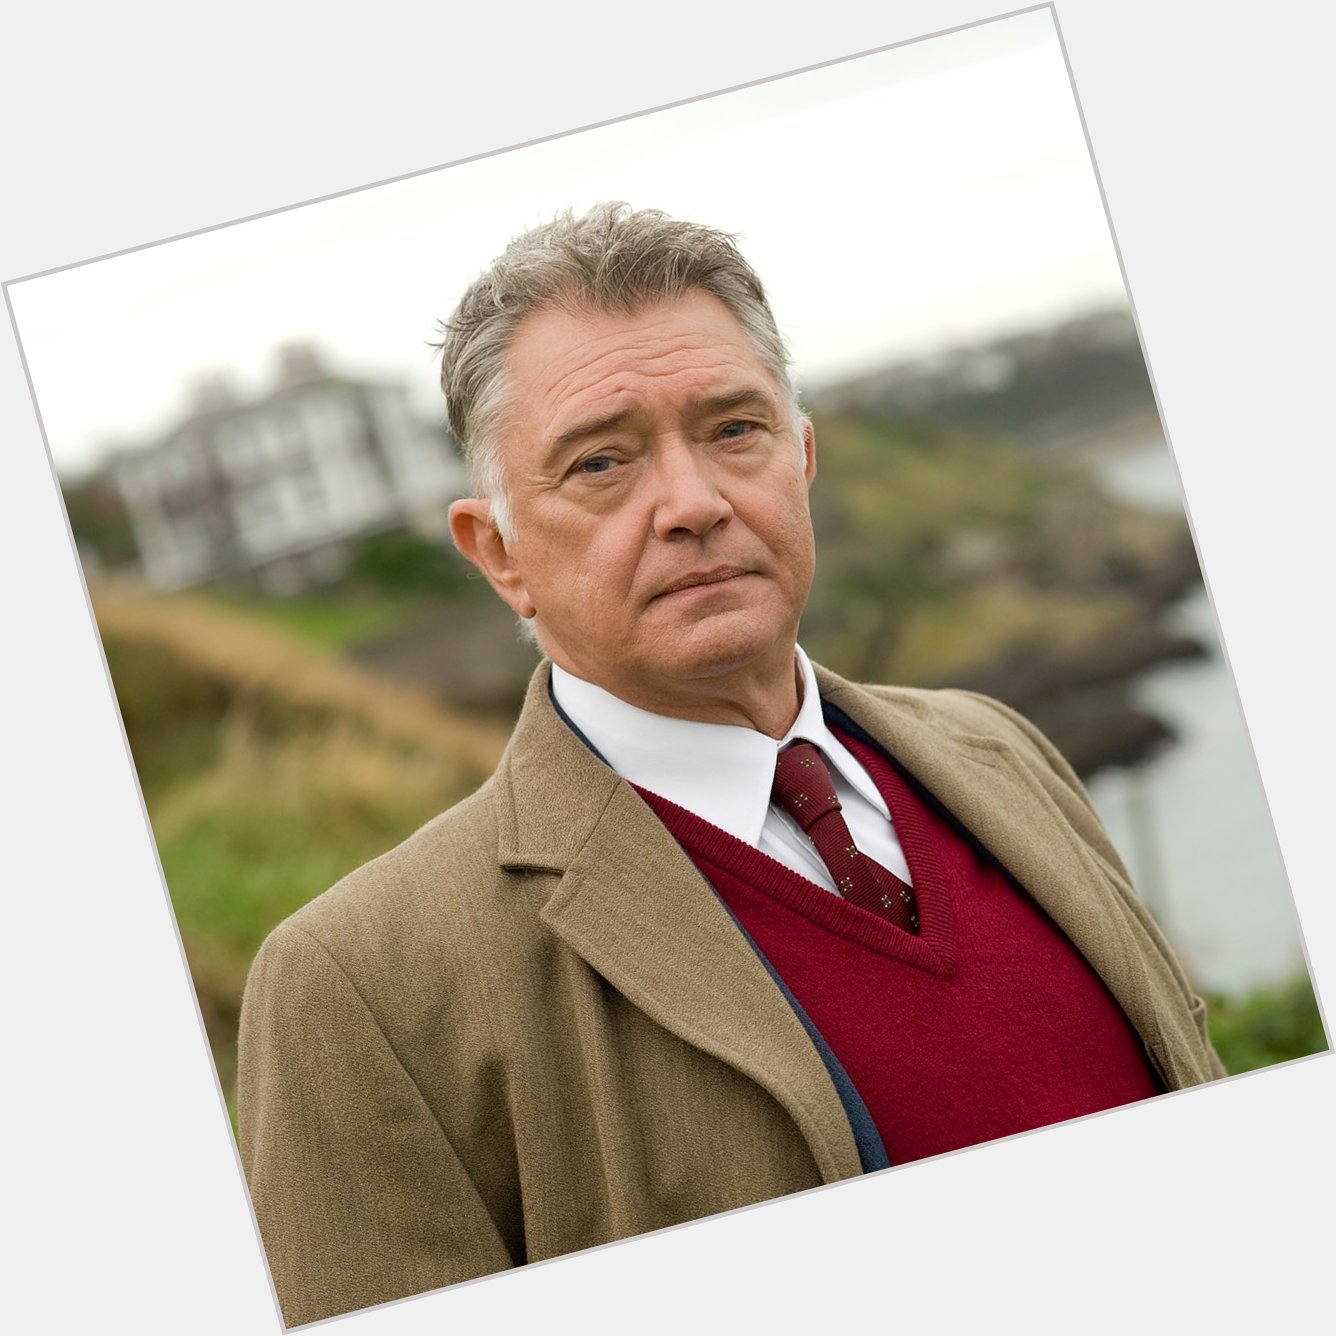 Wishing a very Happy Birthday to Martin Shaw -- the beloved detective George Gently!   